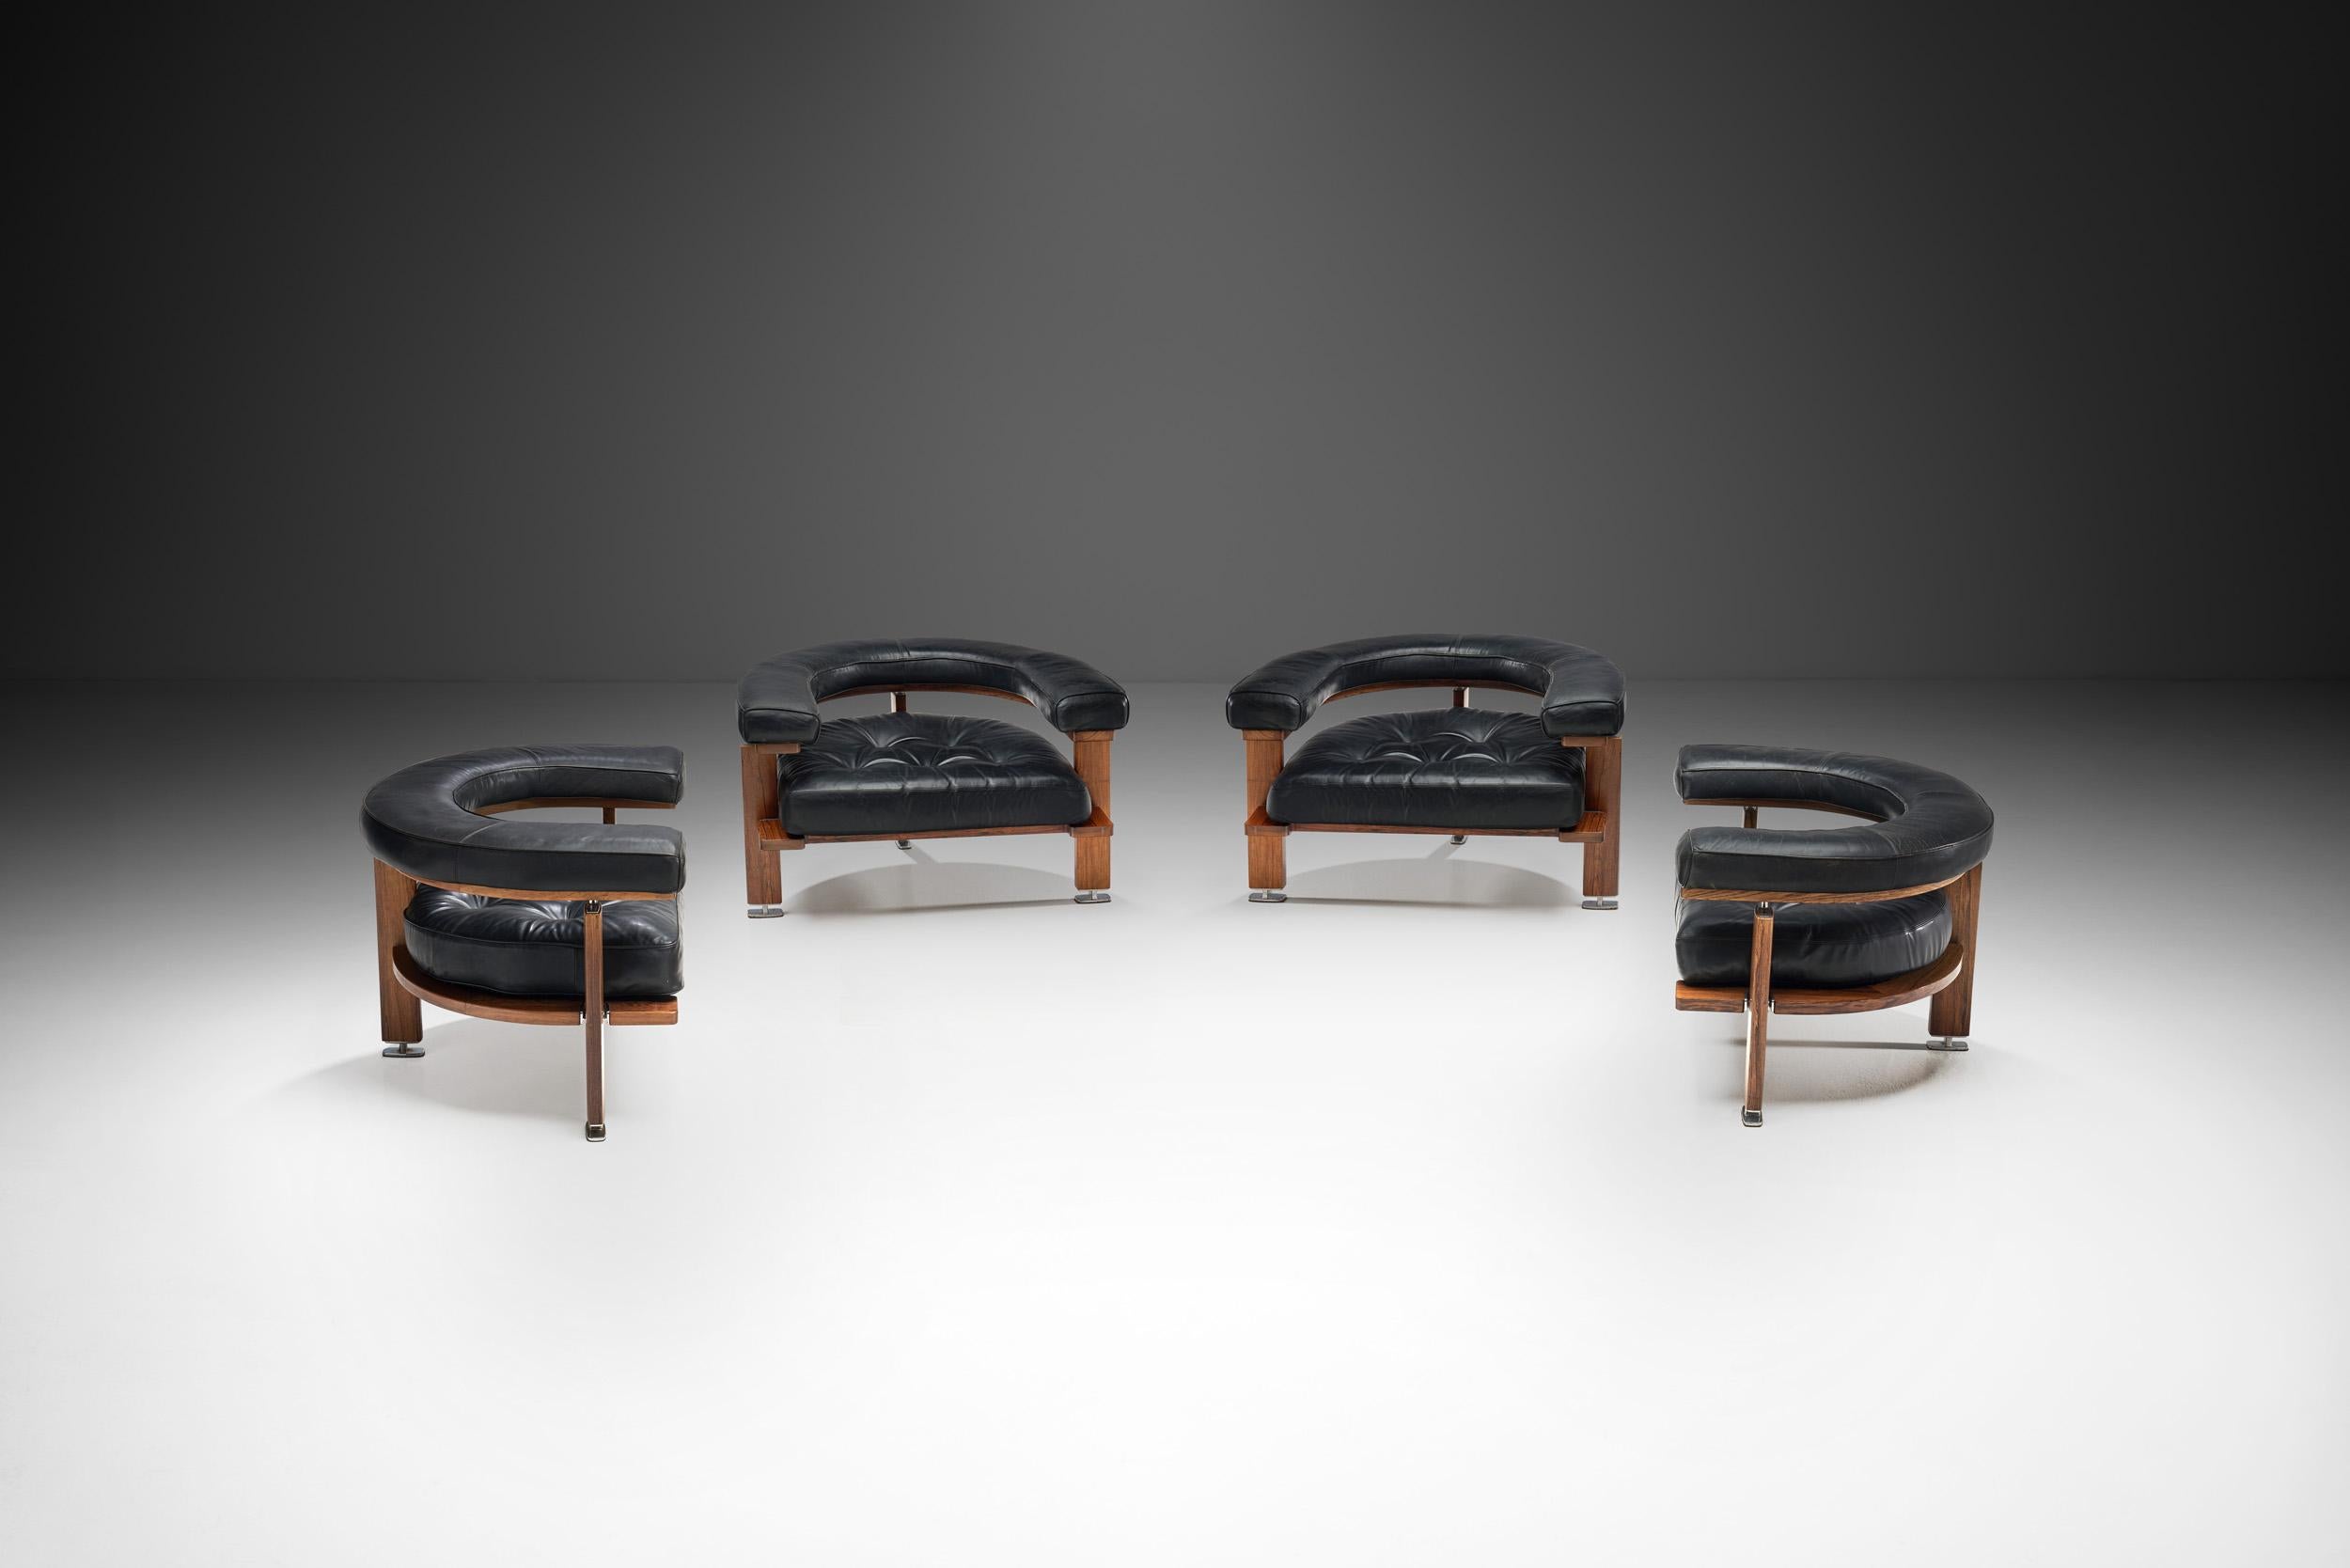 This set of four of “Polar” lounge chairs was designed by the eminent Finnish designer, Esko Pajamies, and produced by Lahden Lepokalusto Oy Finland during the 1960s.

These leather chairs feature a half moon shaped backrest and comfortable,